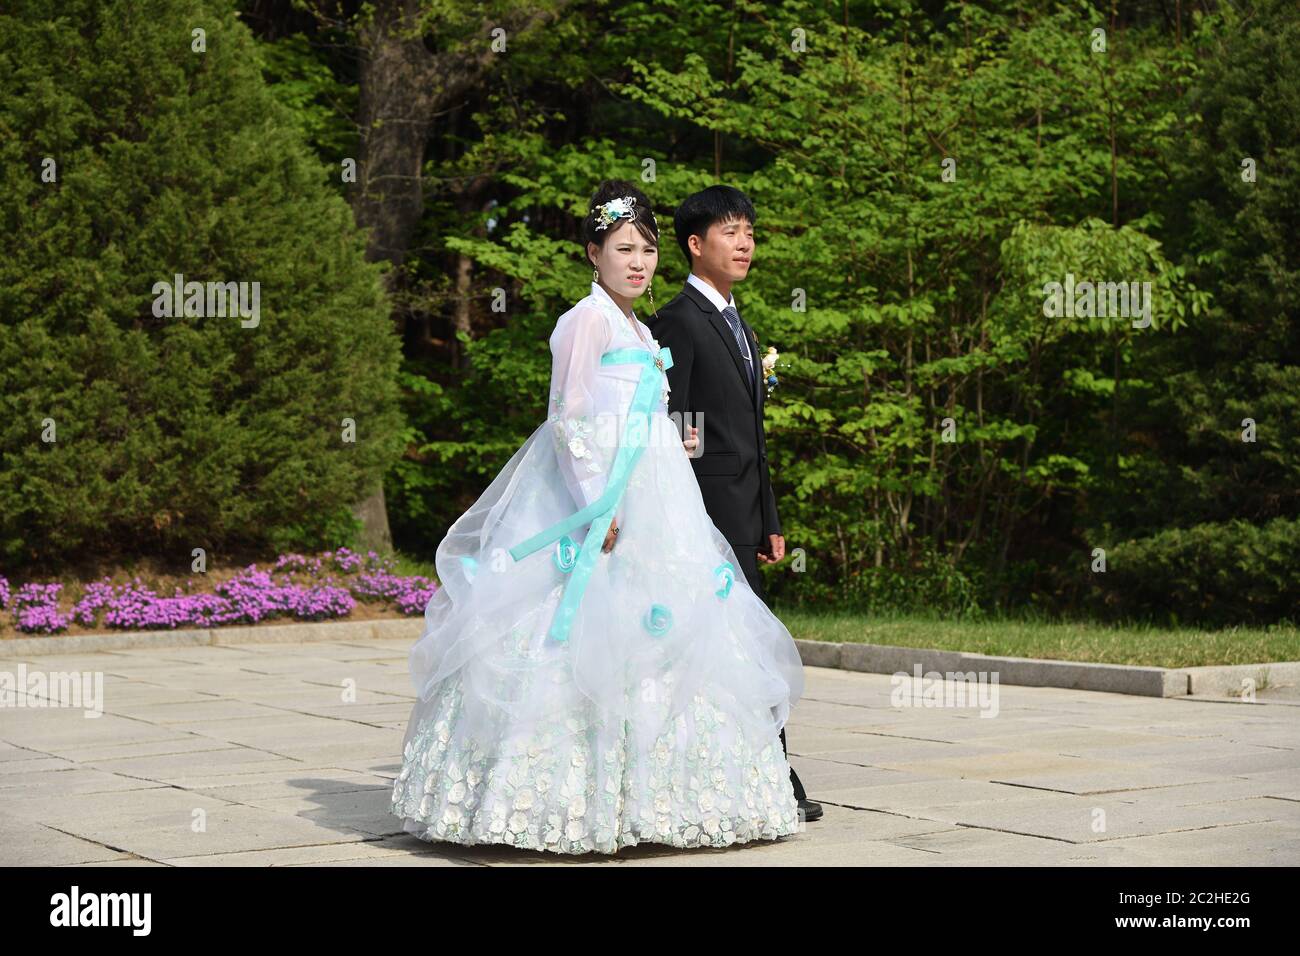 Kaesong, North Korea - May 5, 2019: Young Korean couple in historical place - Tomb of King Wanggon. Newlyweds are photographed against the park backgr Stock Photo